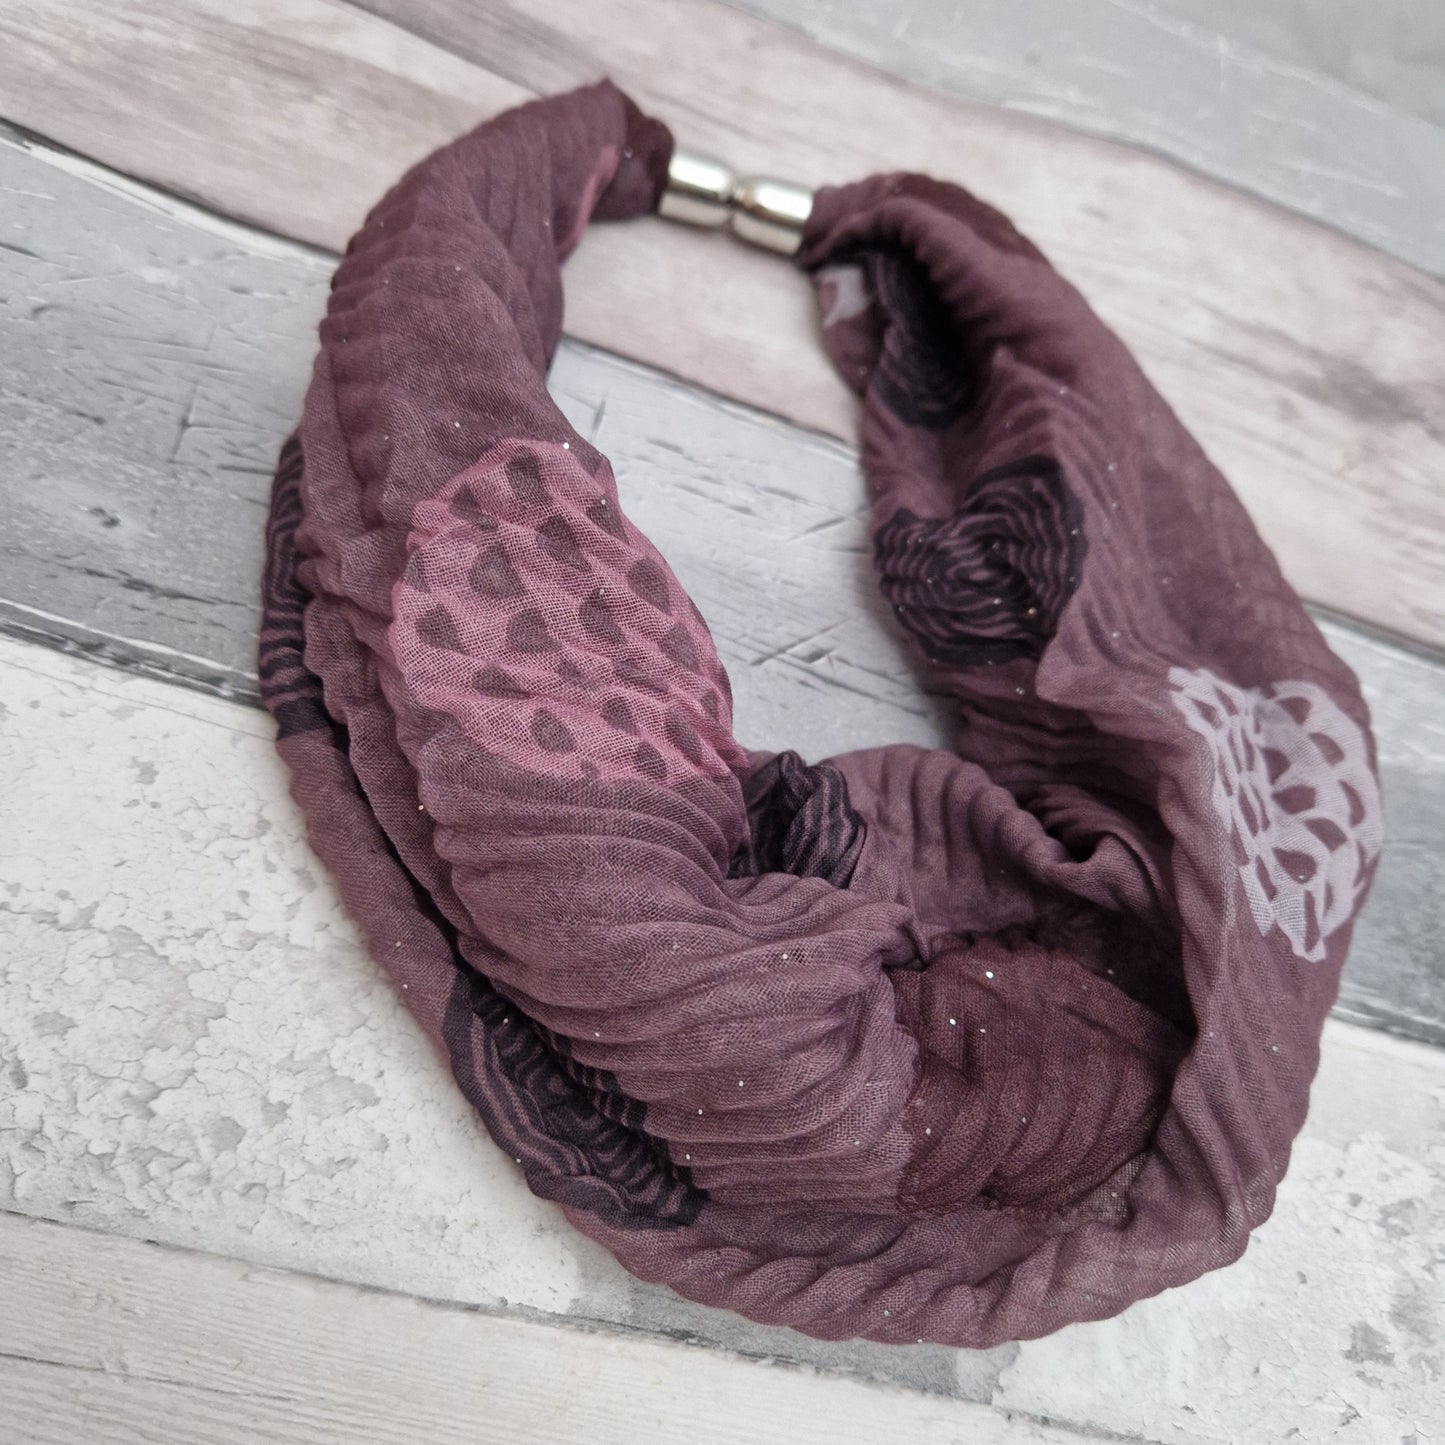 Crinkle effect magnetic neck scarf in dusky pink. Decorated with patterned circles or white, black and maroon.